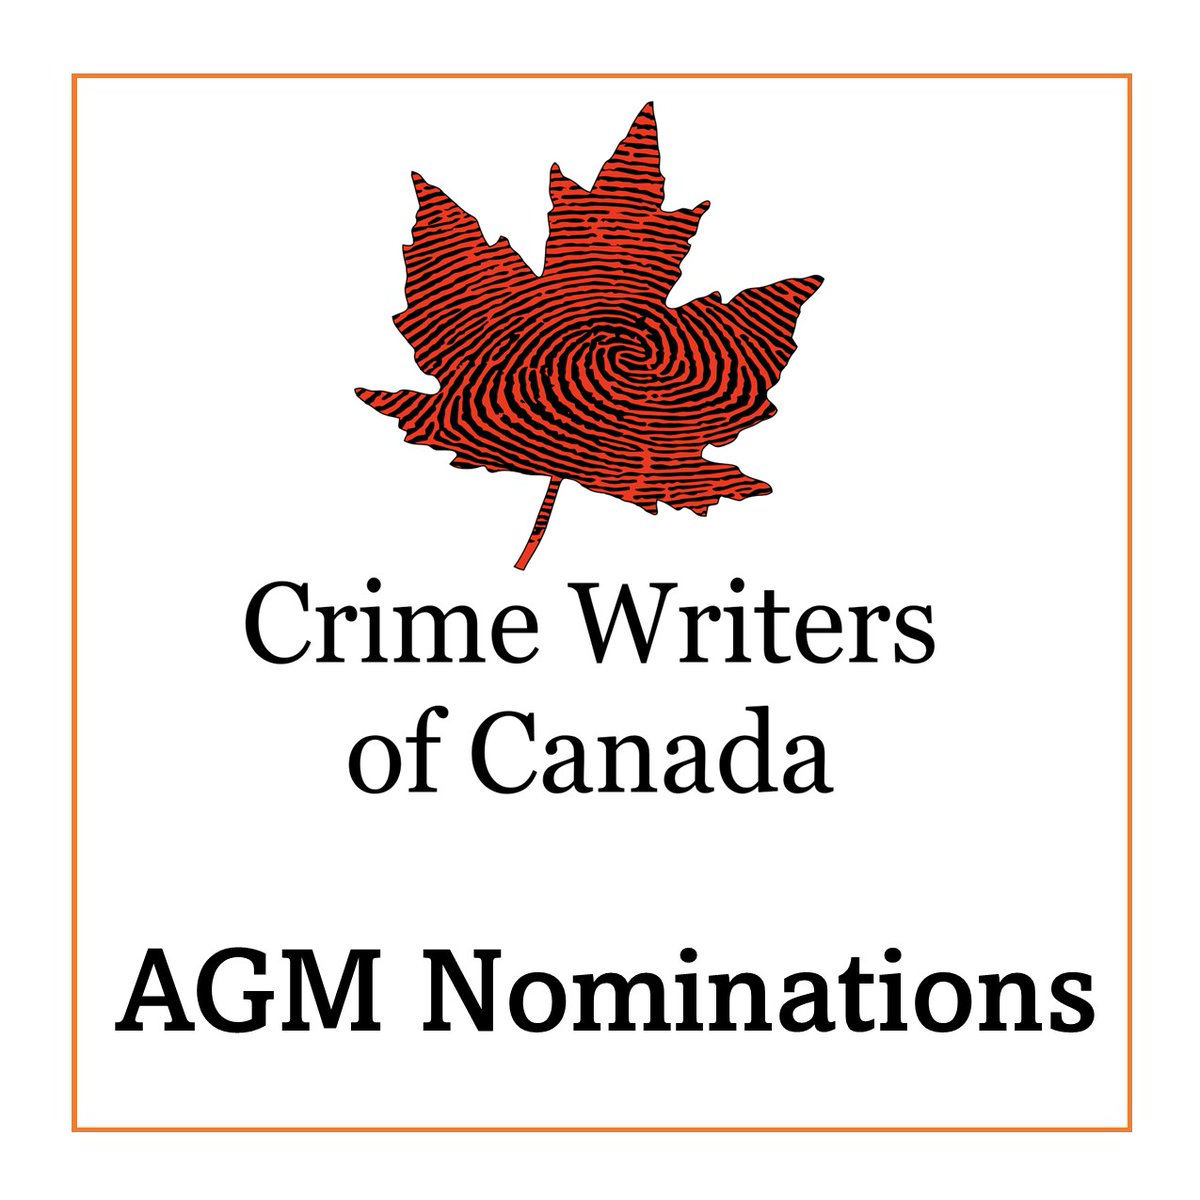 In advance of our Annual General Meeting on June 20th, we are seeking nominations/ volunteers to join our board. Contact current directors or the Executive Director for more information. Visit crimewriterscanada.com/index.php/en/p… for position descriptions and to apply or nominate a colleague.